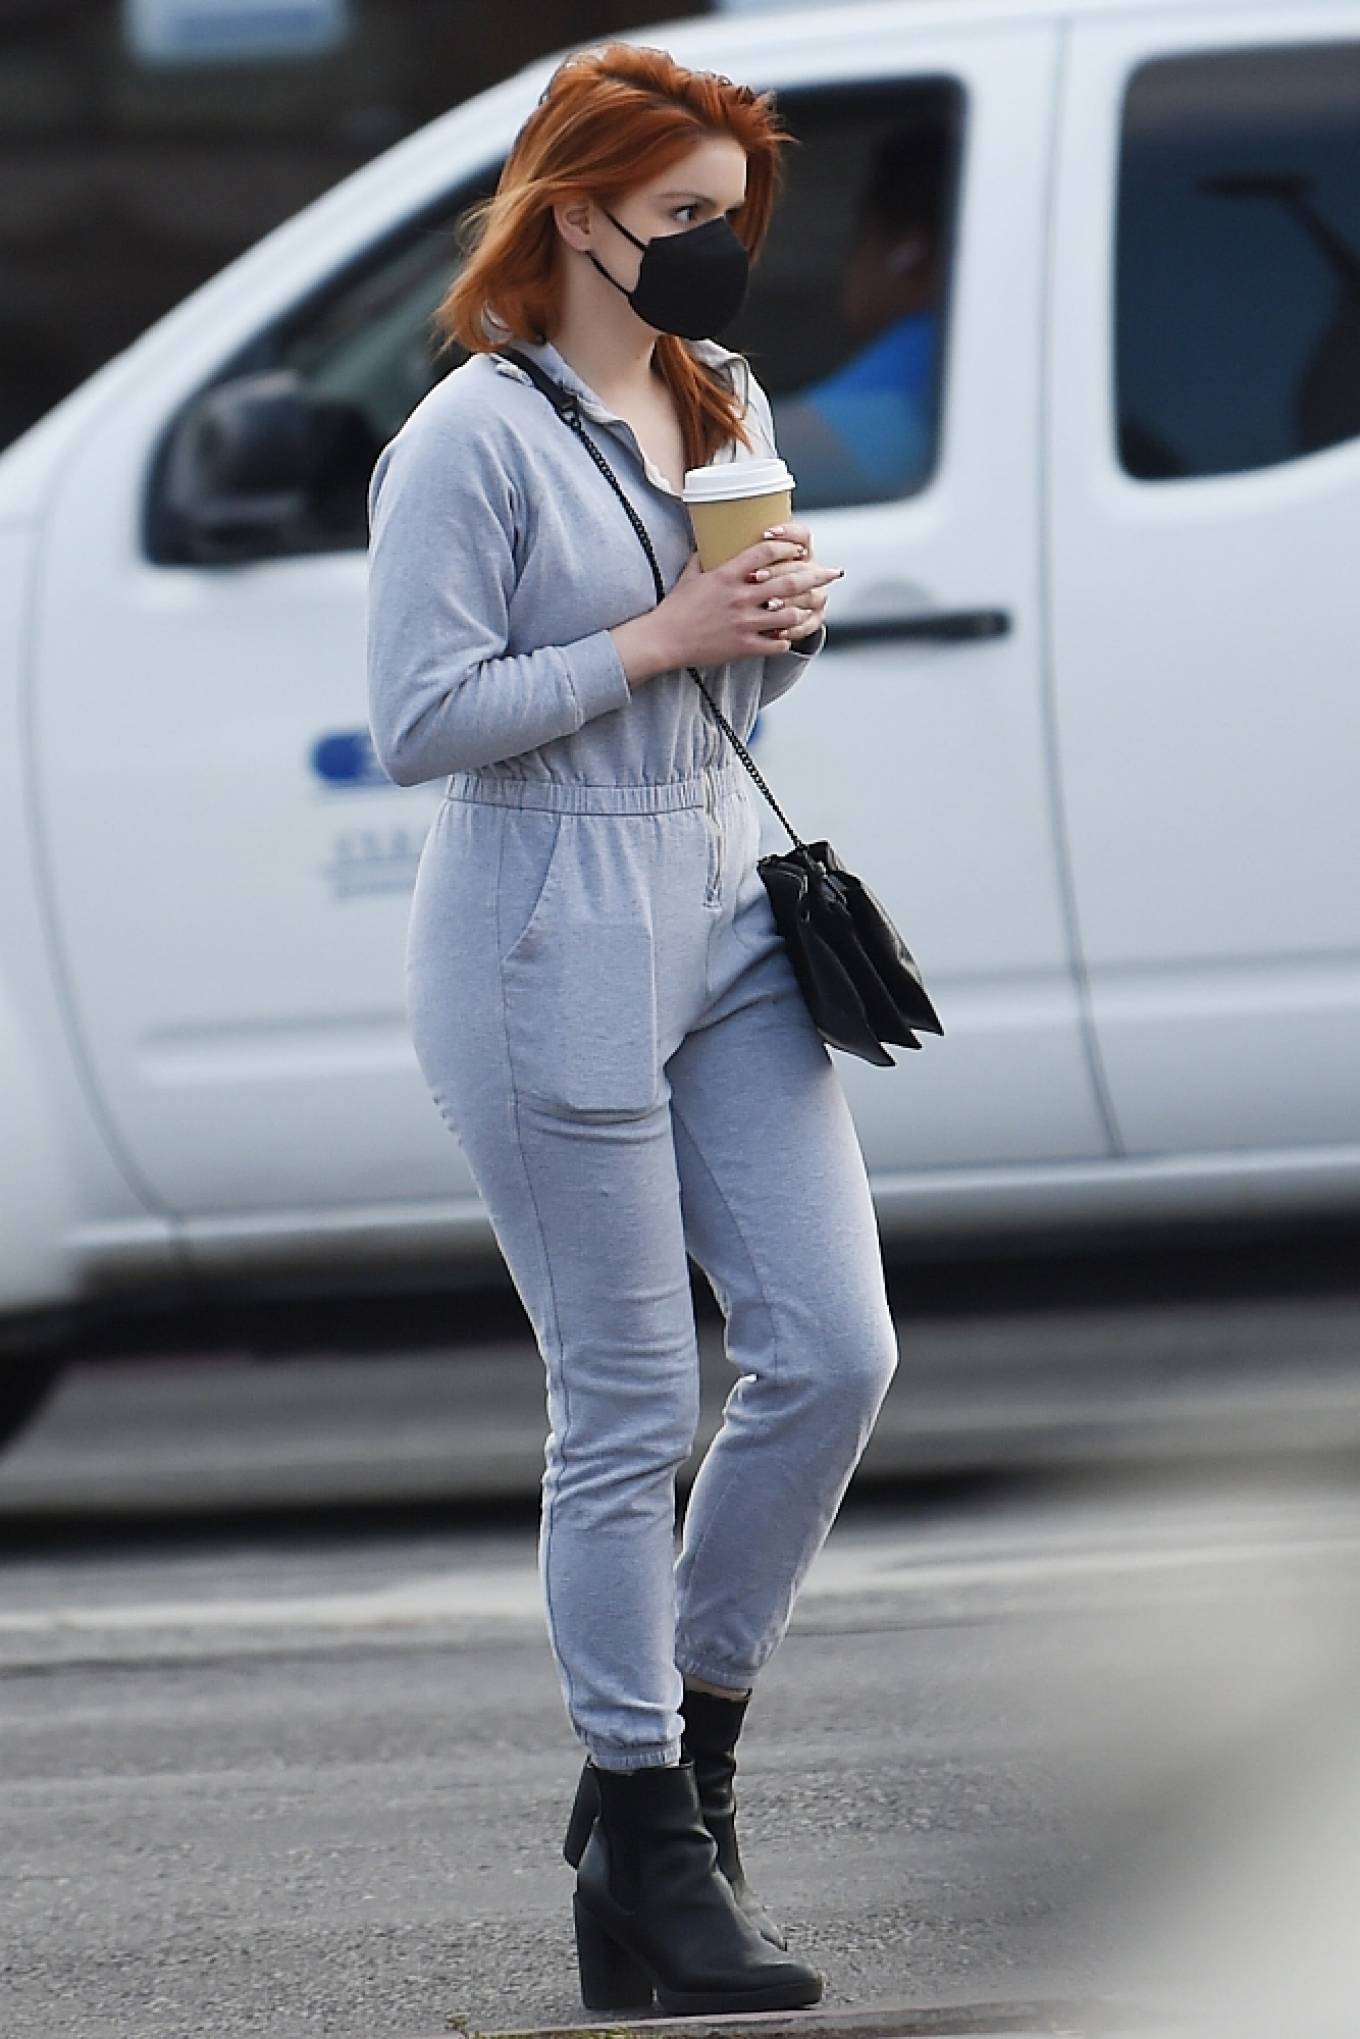 Ariel Winter 2021 : Ariel Winter – Grabs a cup of coffee in West Hollywood-28